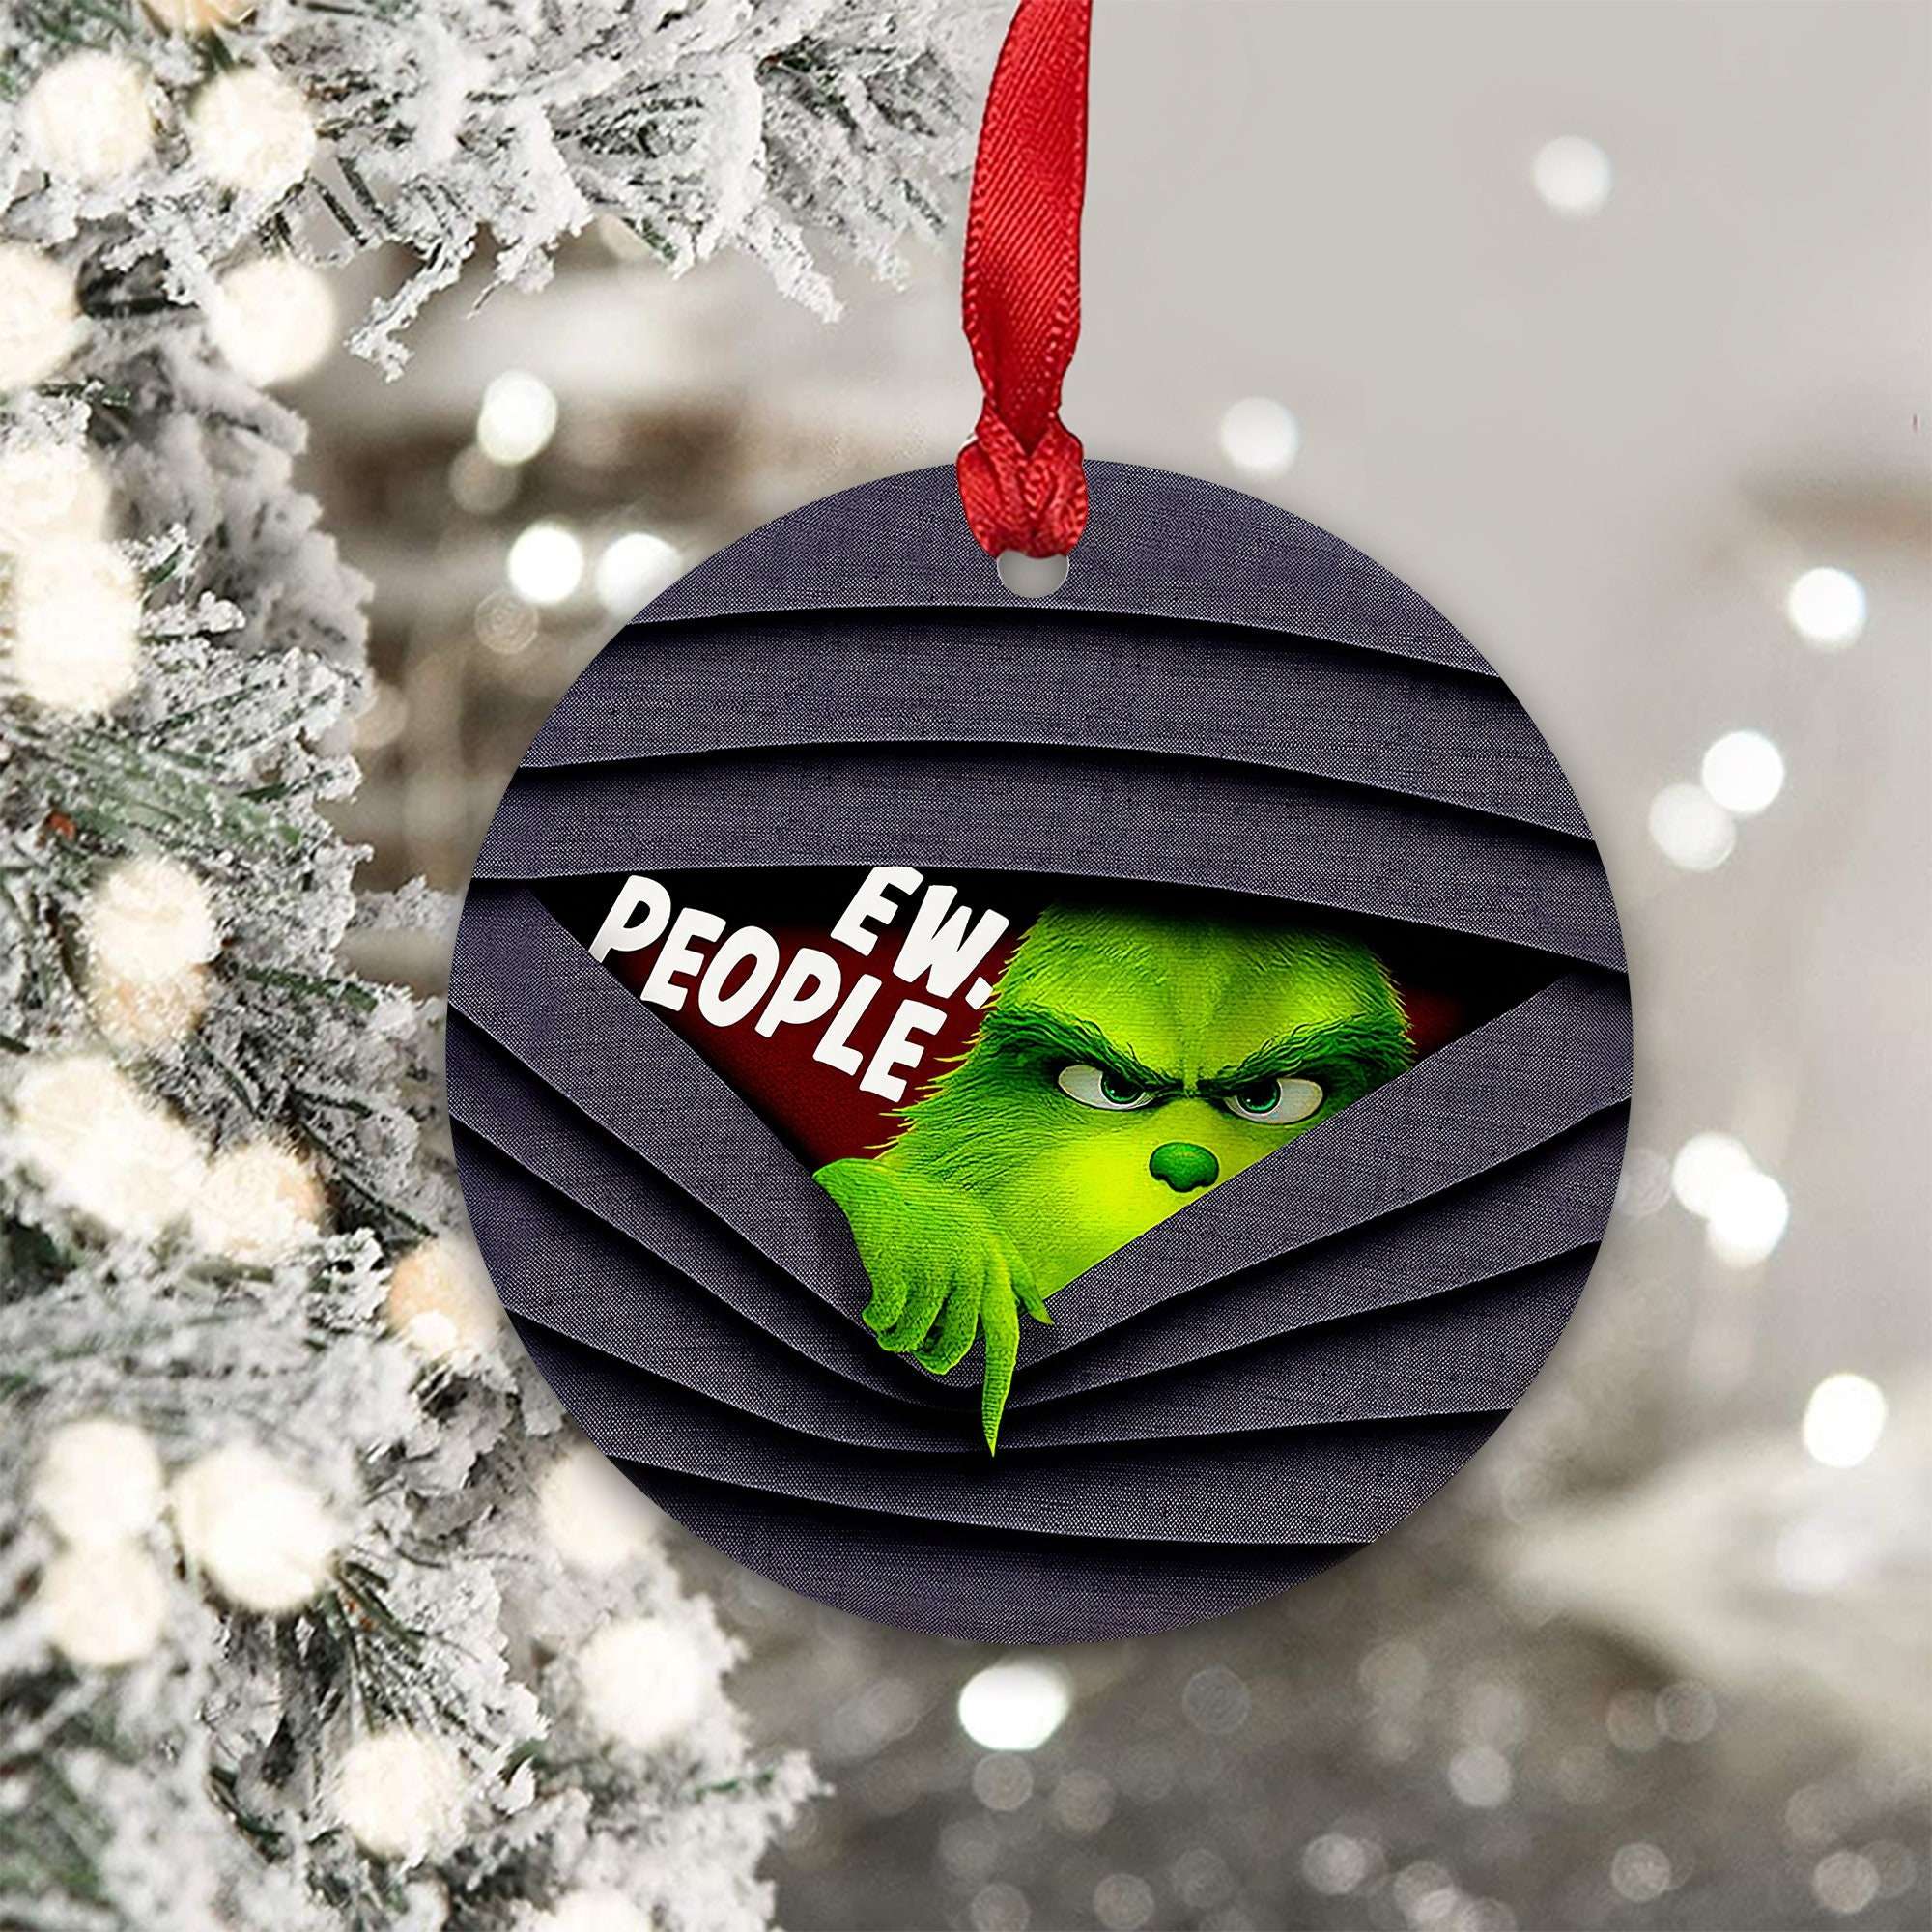 Ew People Grinch Hand Holding Ornament Christmas, The Grinch Ornaments